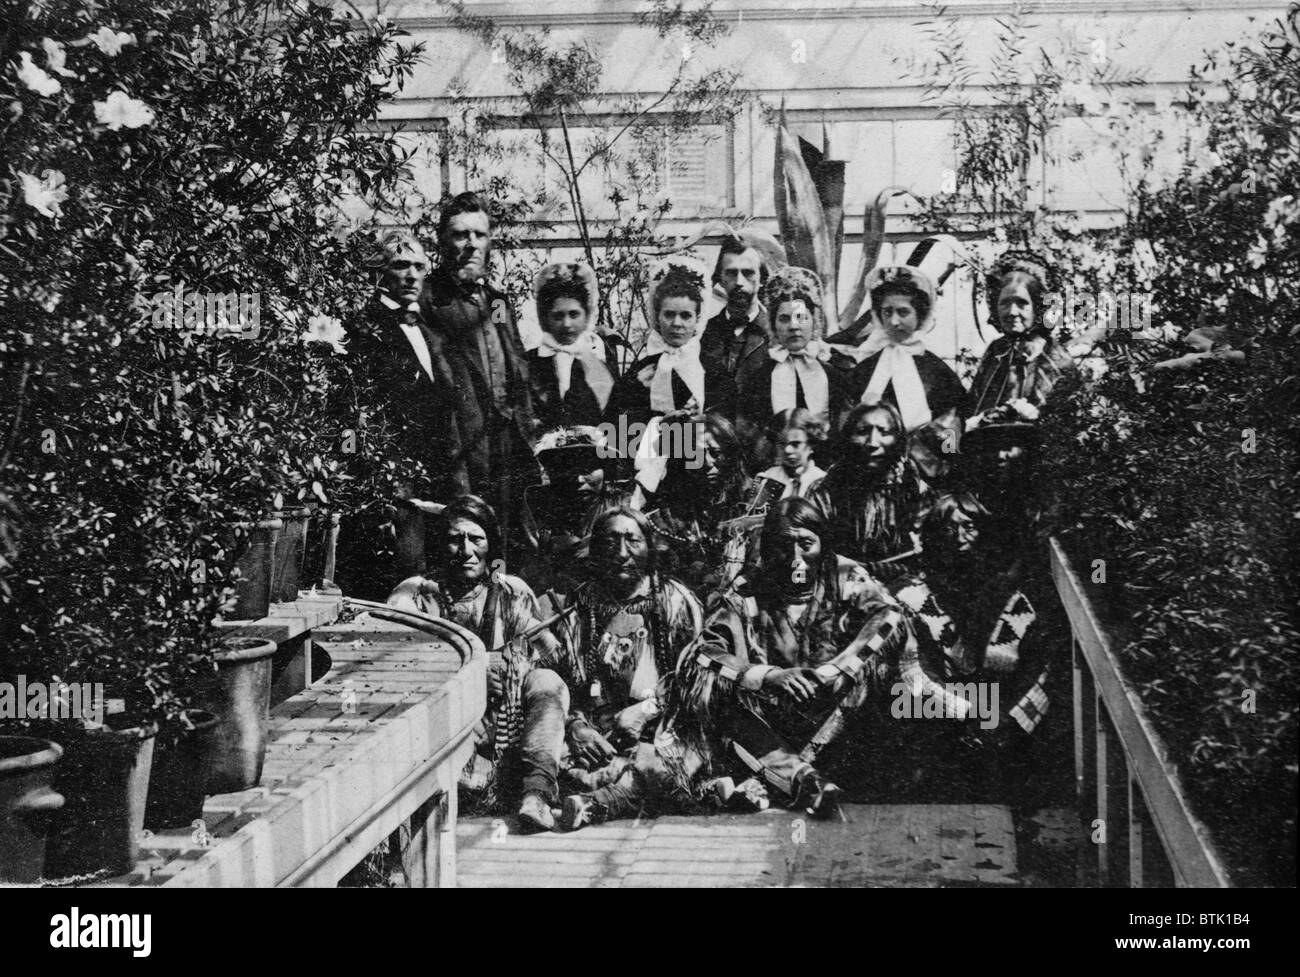 Mary Todd Lincoln (standing at far right) in a group photo with a Southern Plains Indian delegation taken in the White House Conservatory on March 27, 1863. Stock Photo